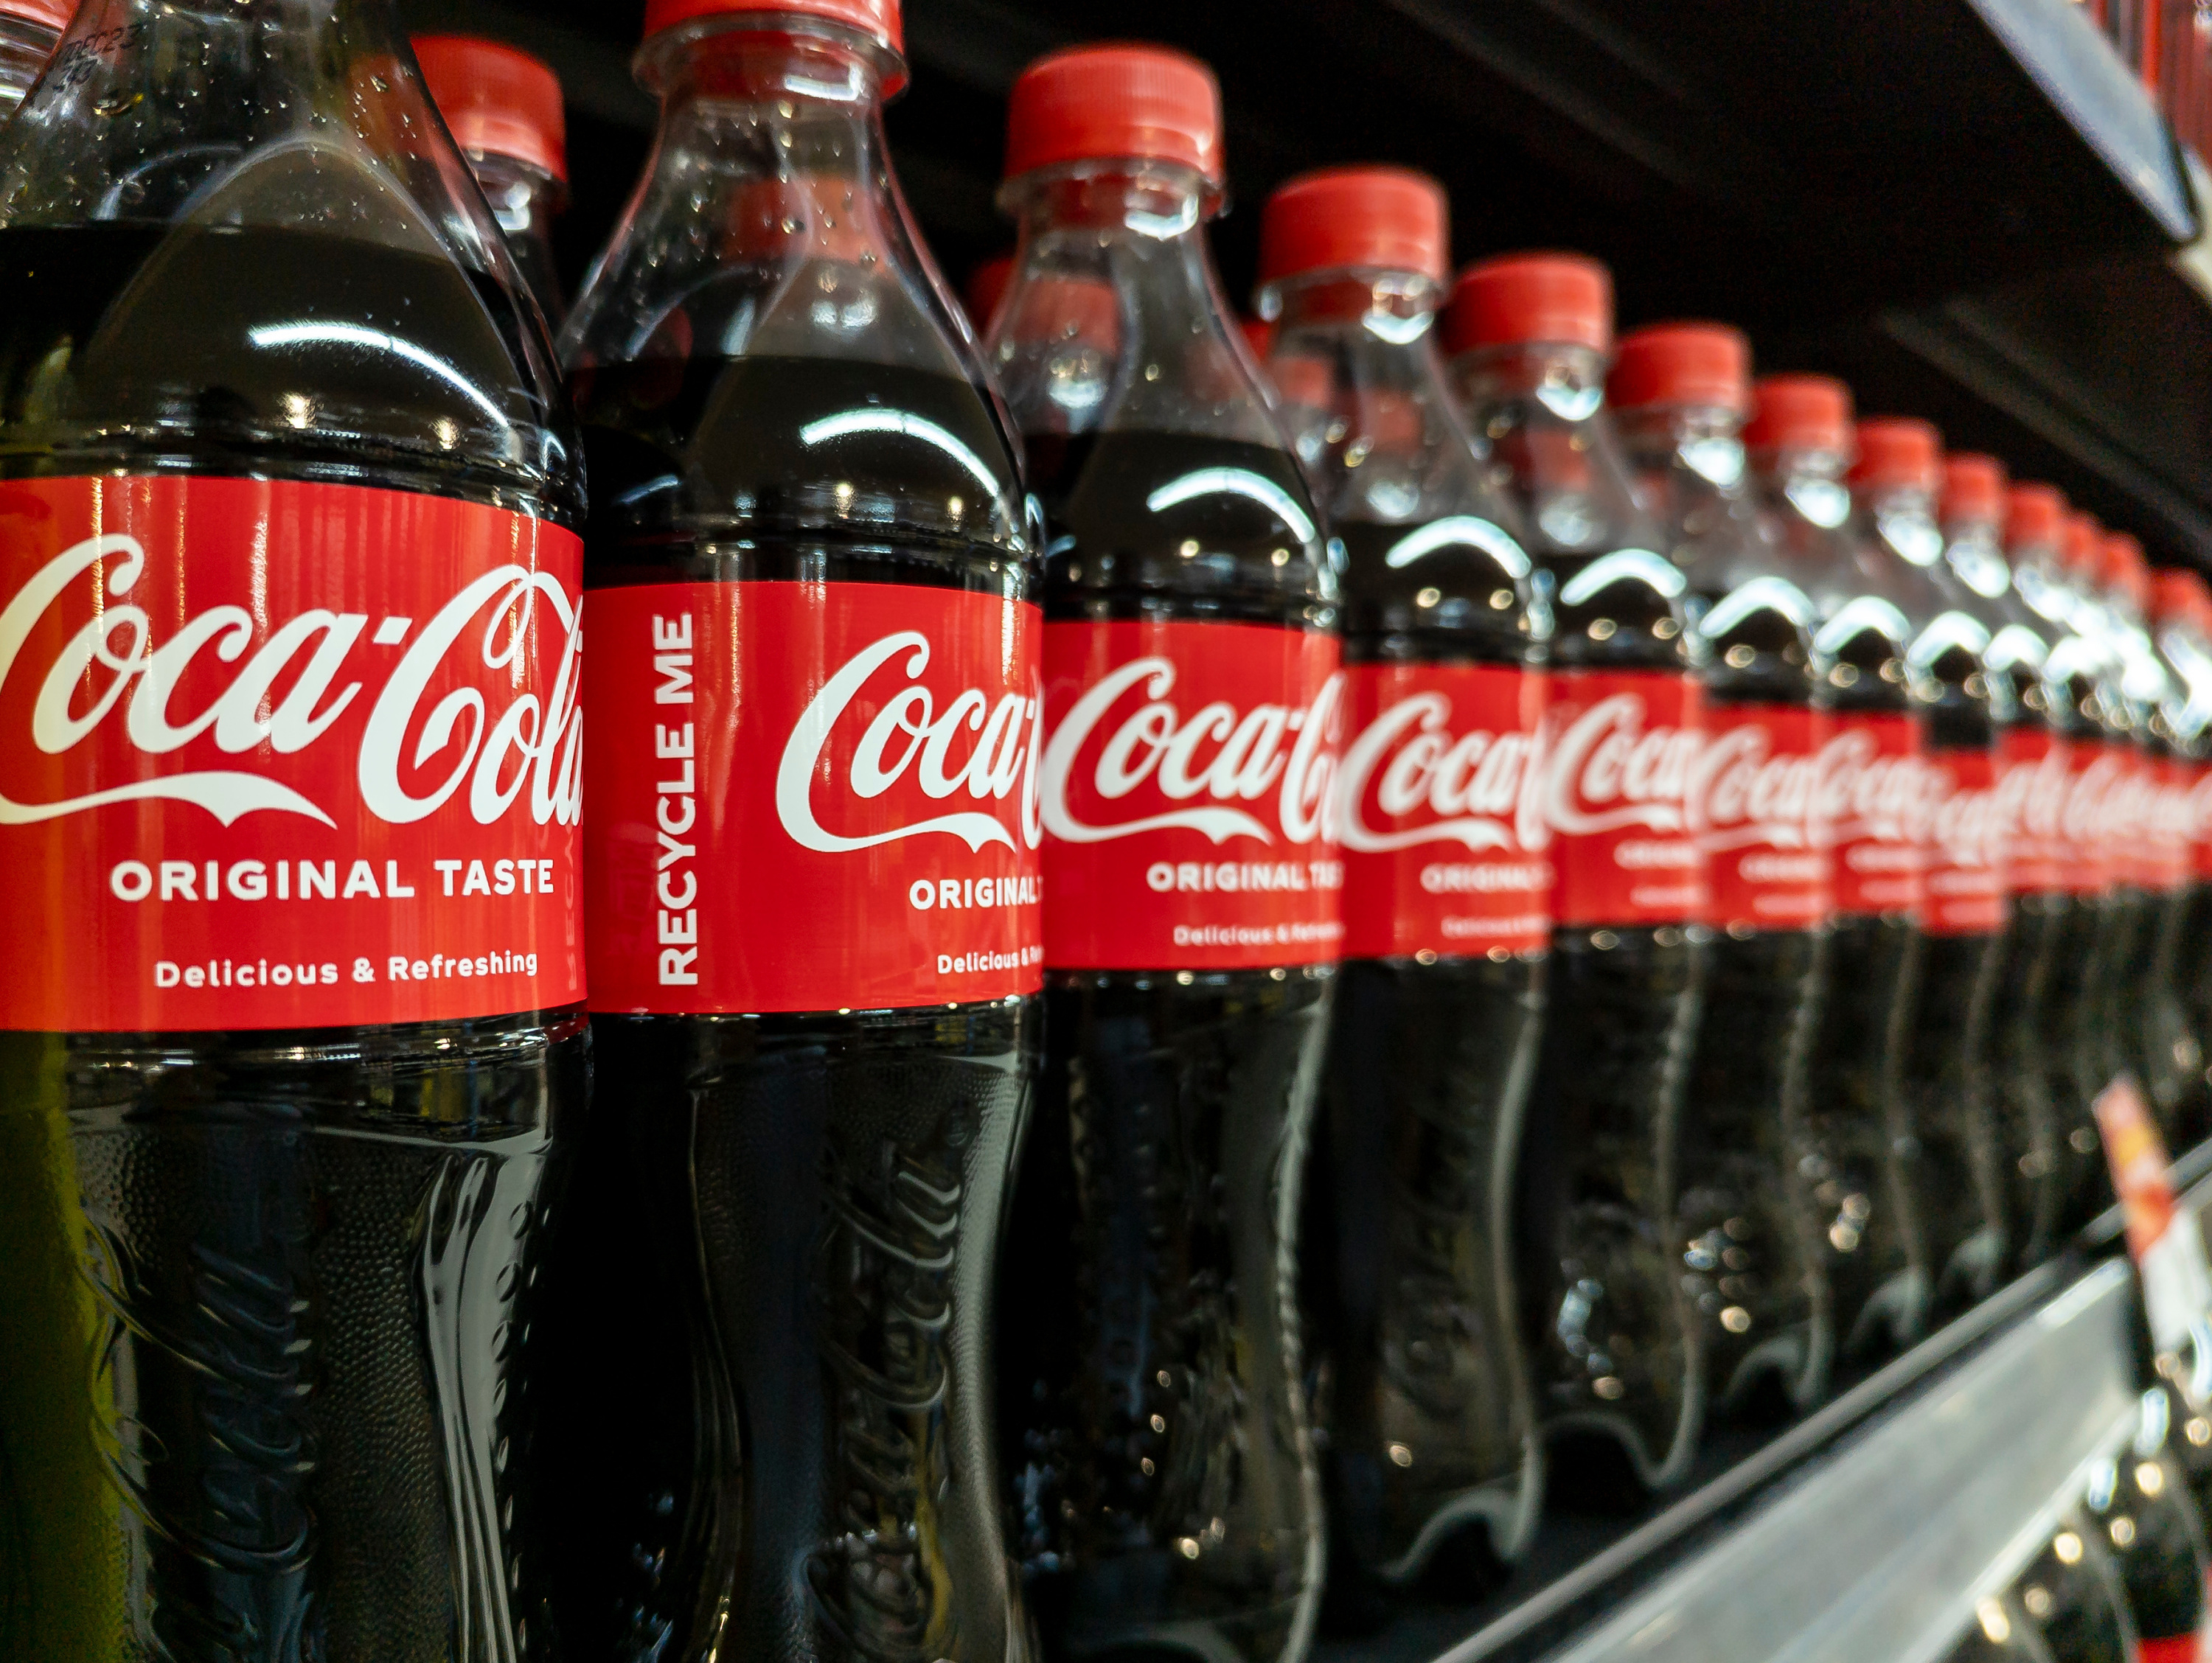 Coca-Cola closes its oldest factory in France